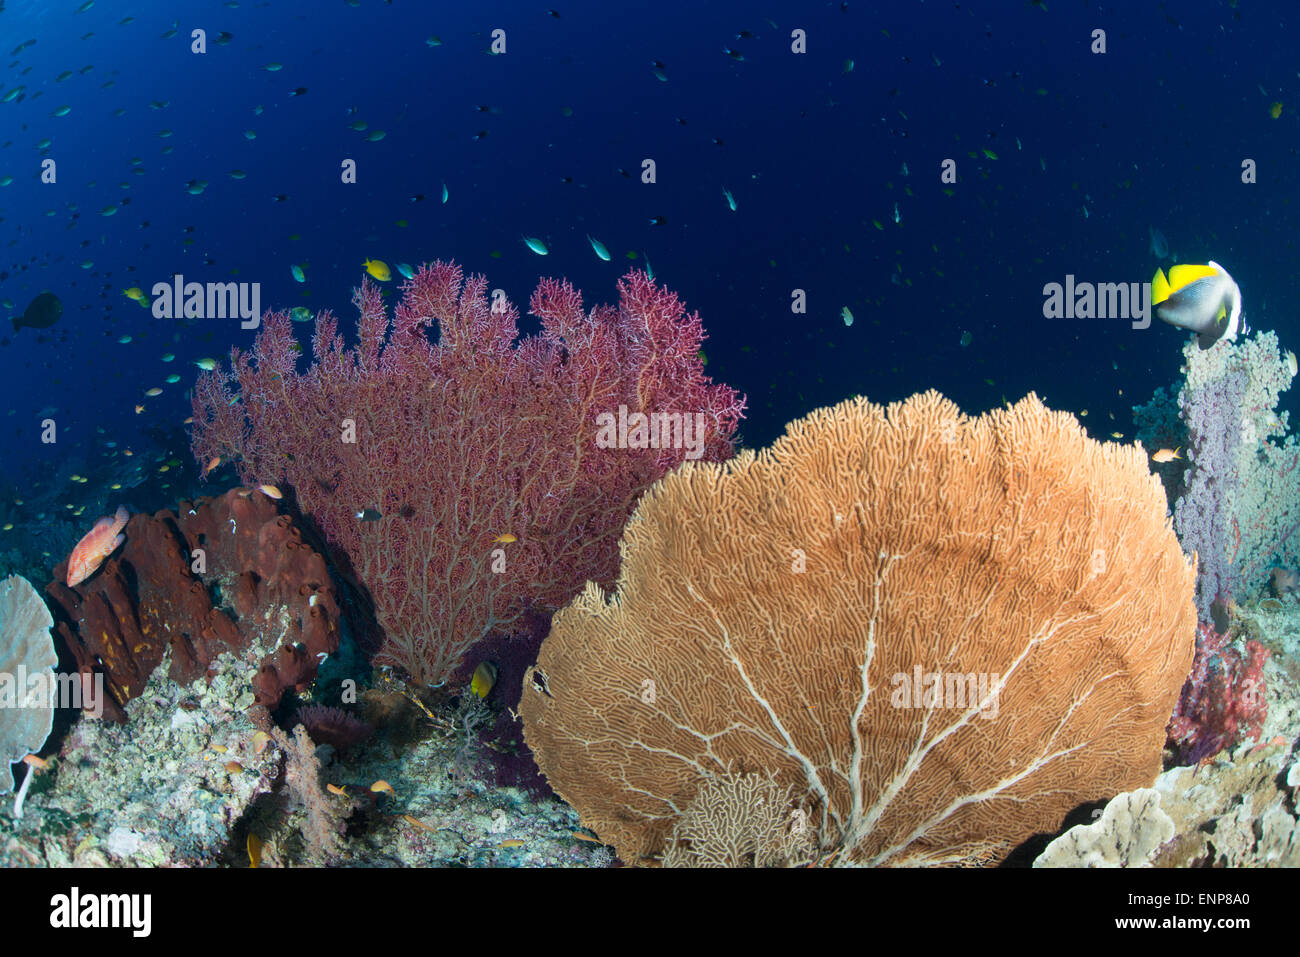 Underwater Coral scene with colorful corals  and small fish of many kinds taken in Raja Ampat, Indonesia Stock Photo